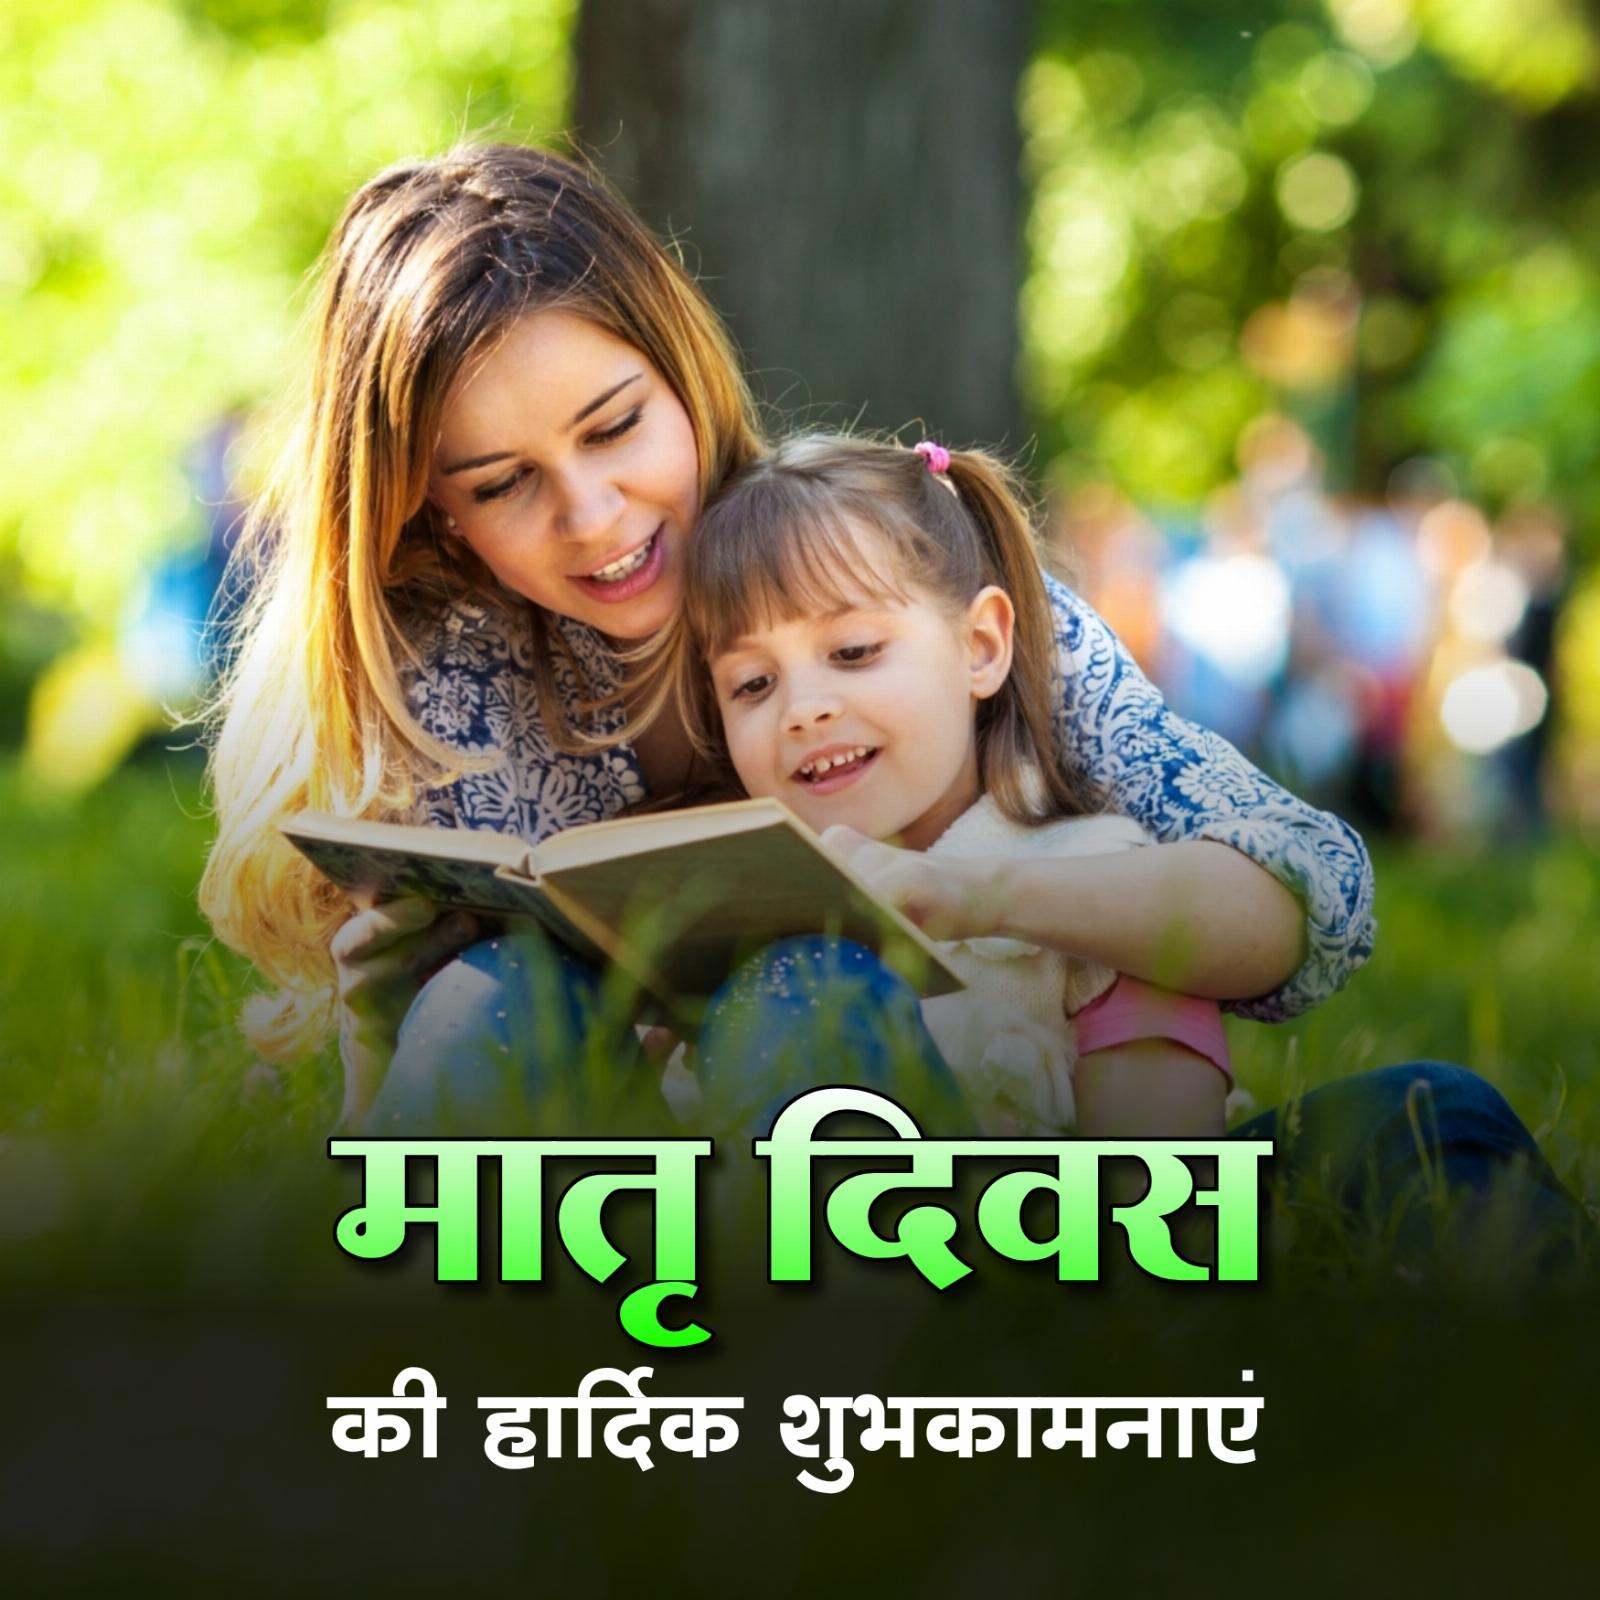 Happy Mothers Day Images in Hindi Download